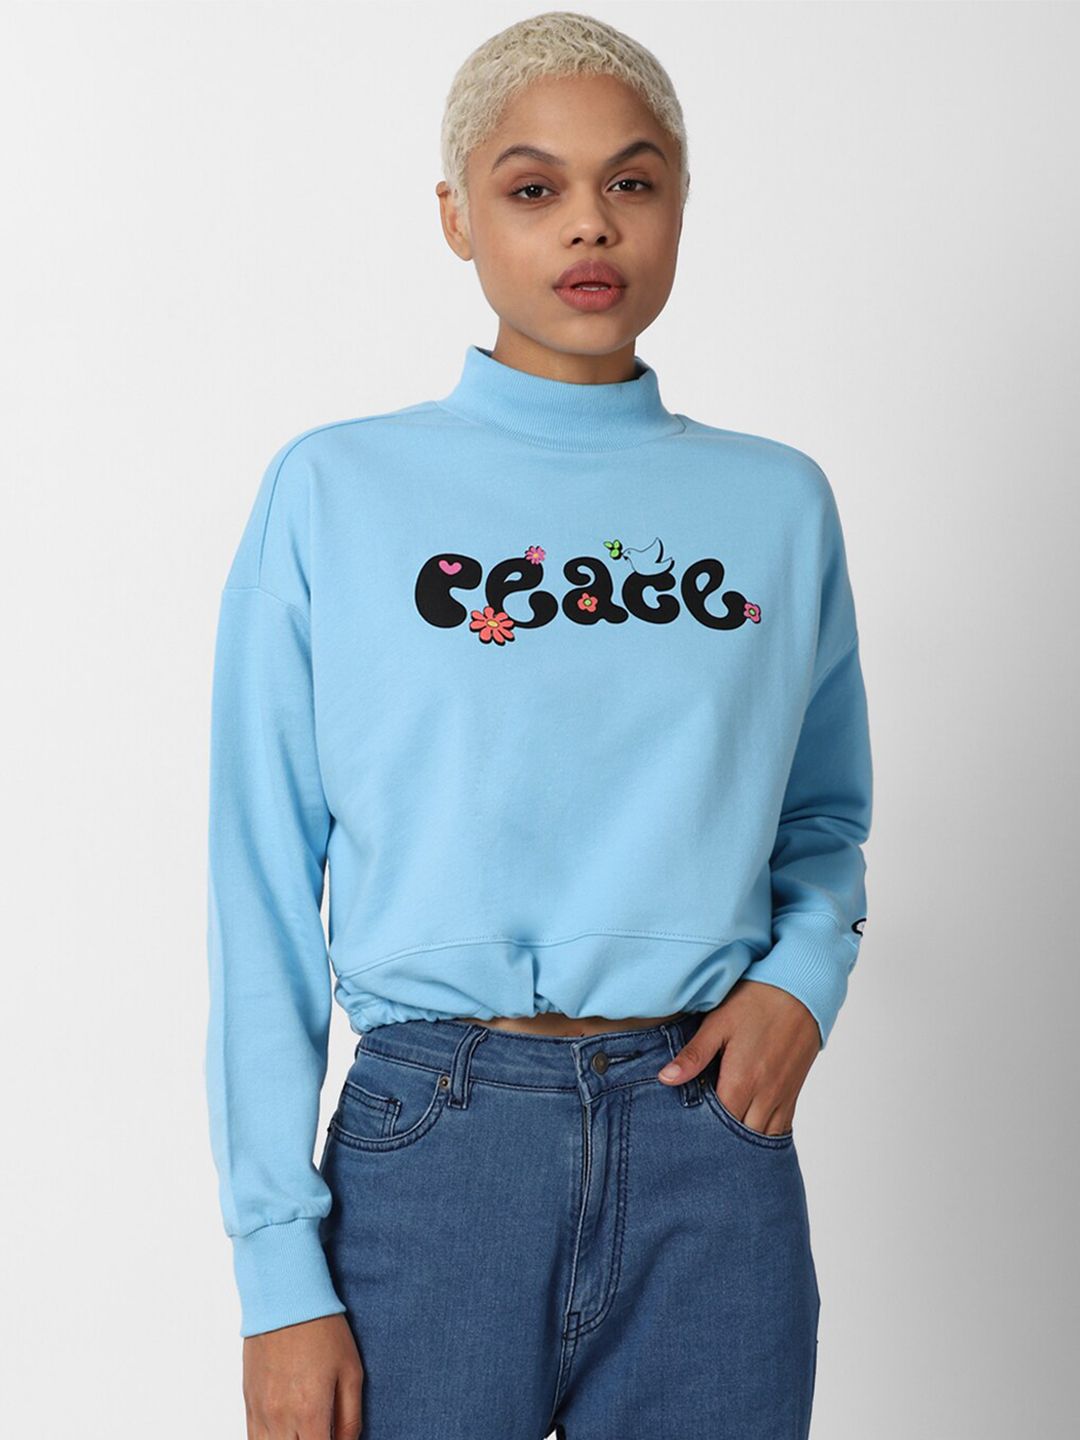 FOREVER 21 Women Blue Printed Cotton Sweatshirt Price in India